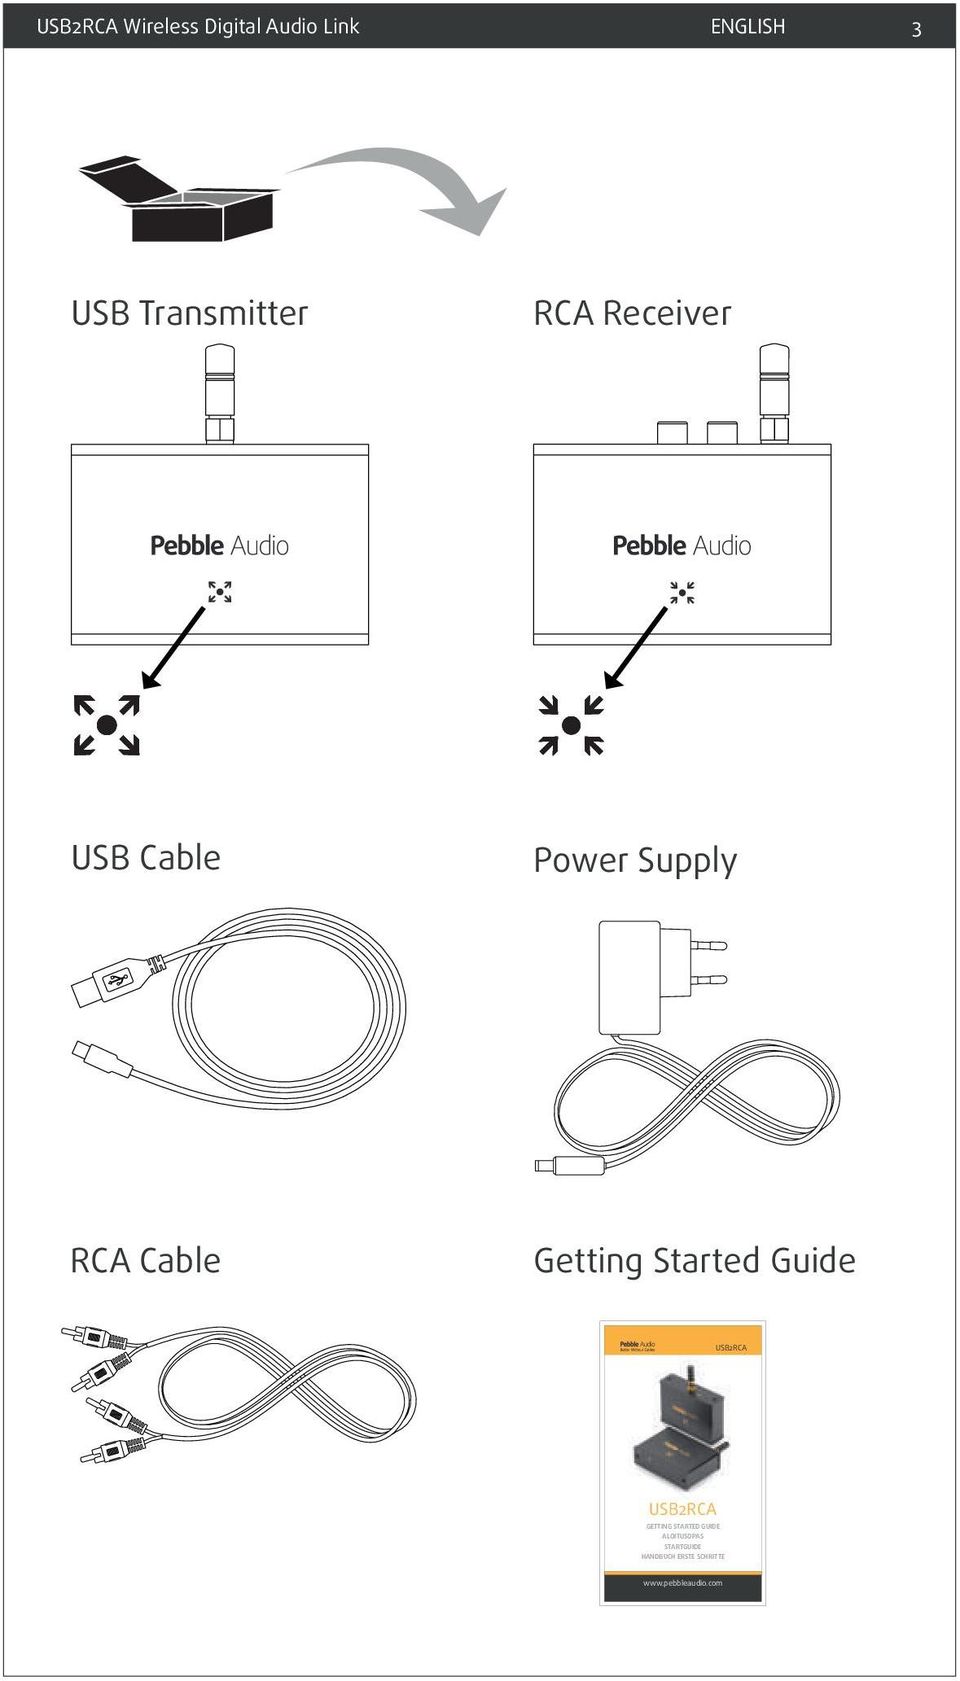 Getting Started Guide USB2RCA USB2RCA Getting Started